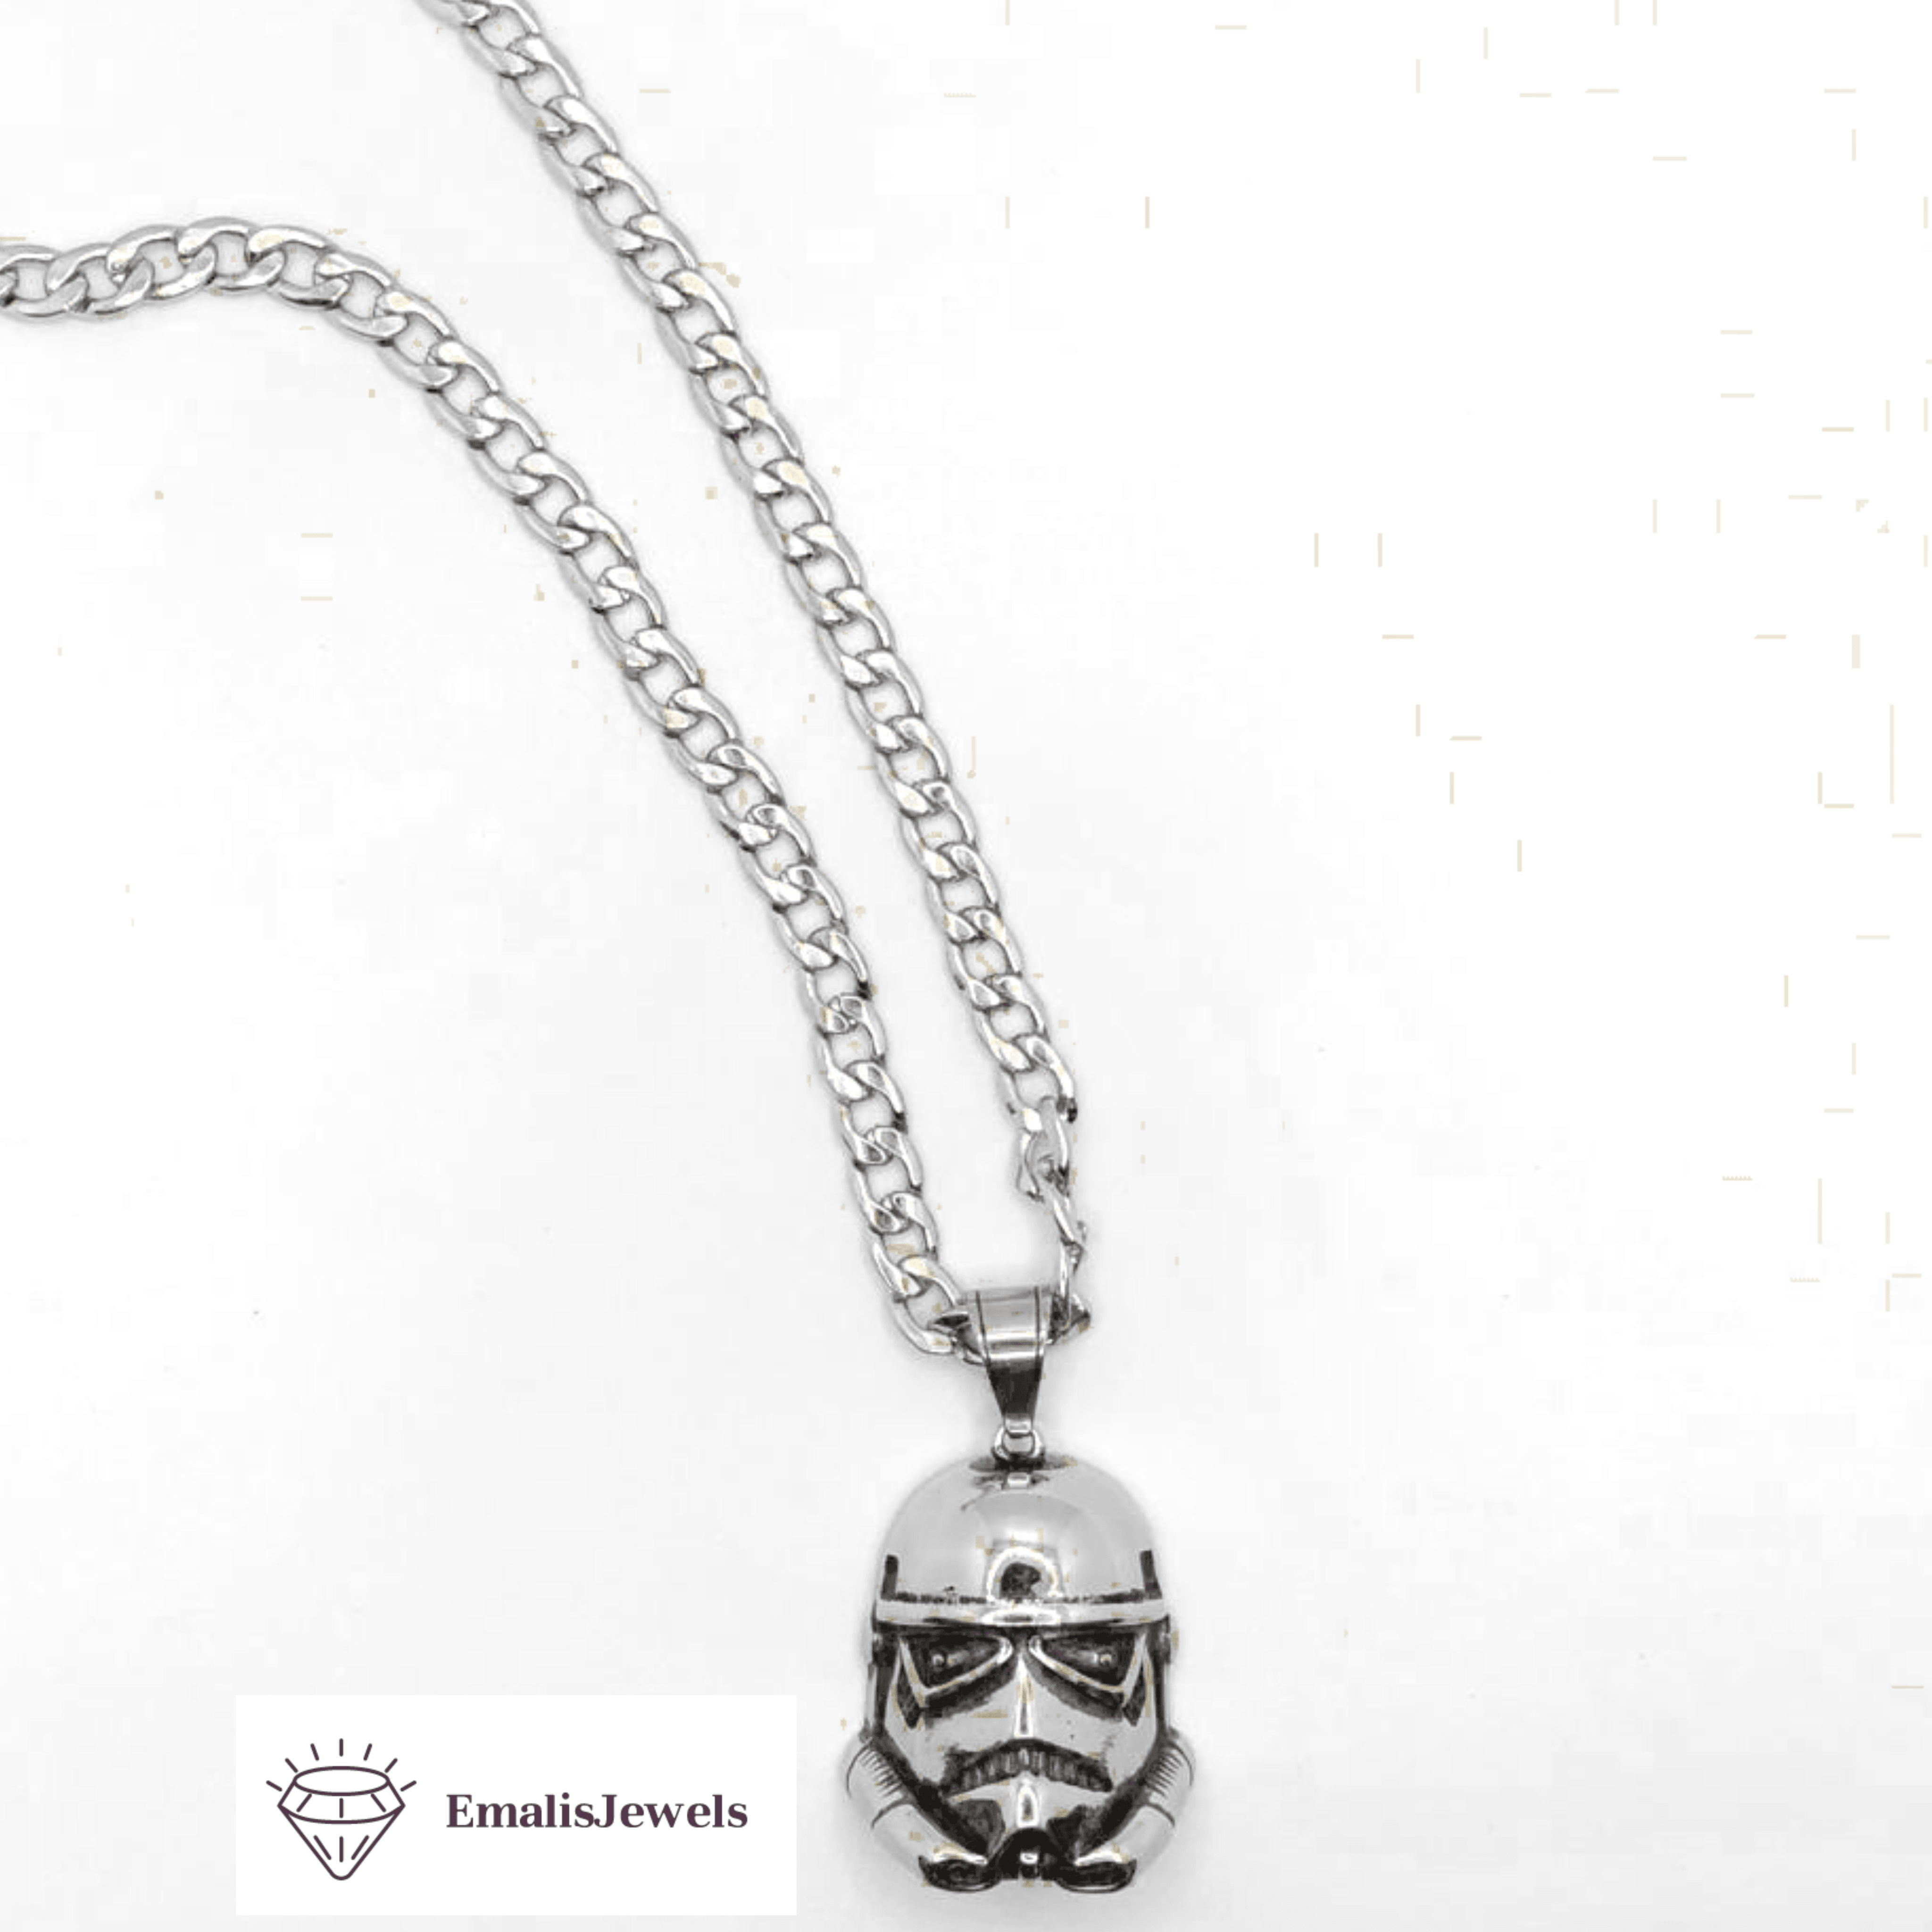 Stainless Steel Chain Necklace and Stainless Steel Vader Villian Pendant